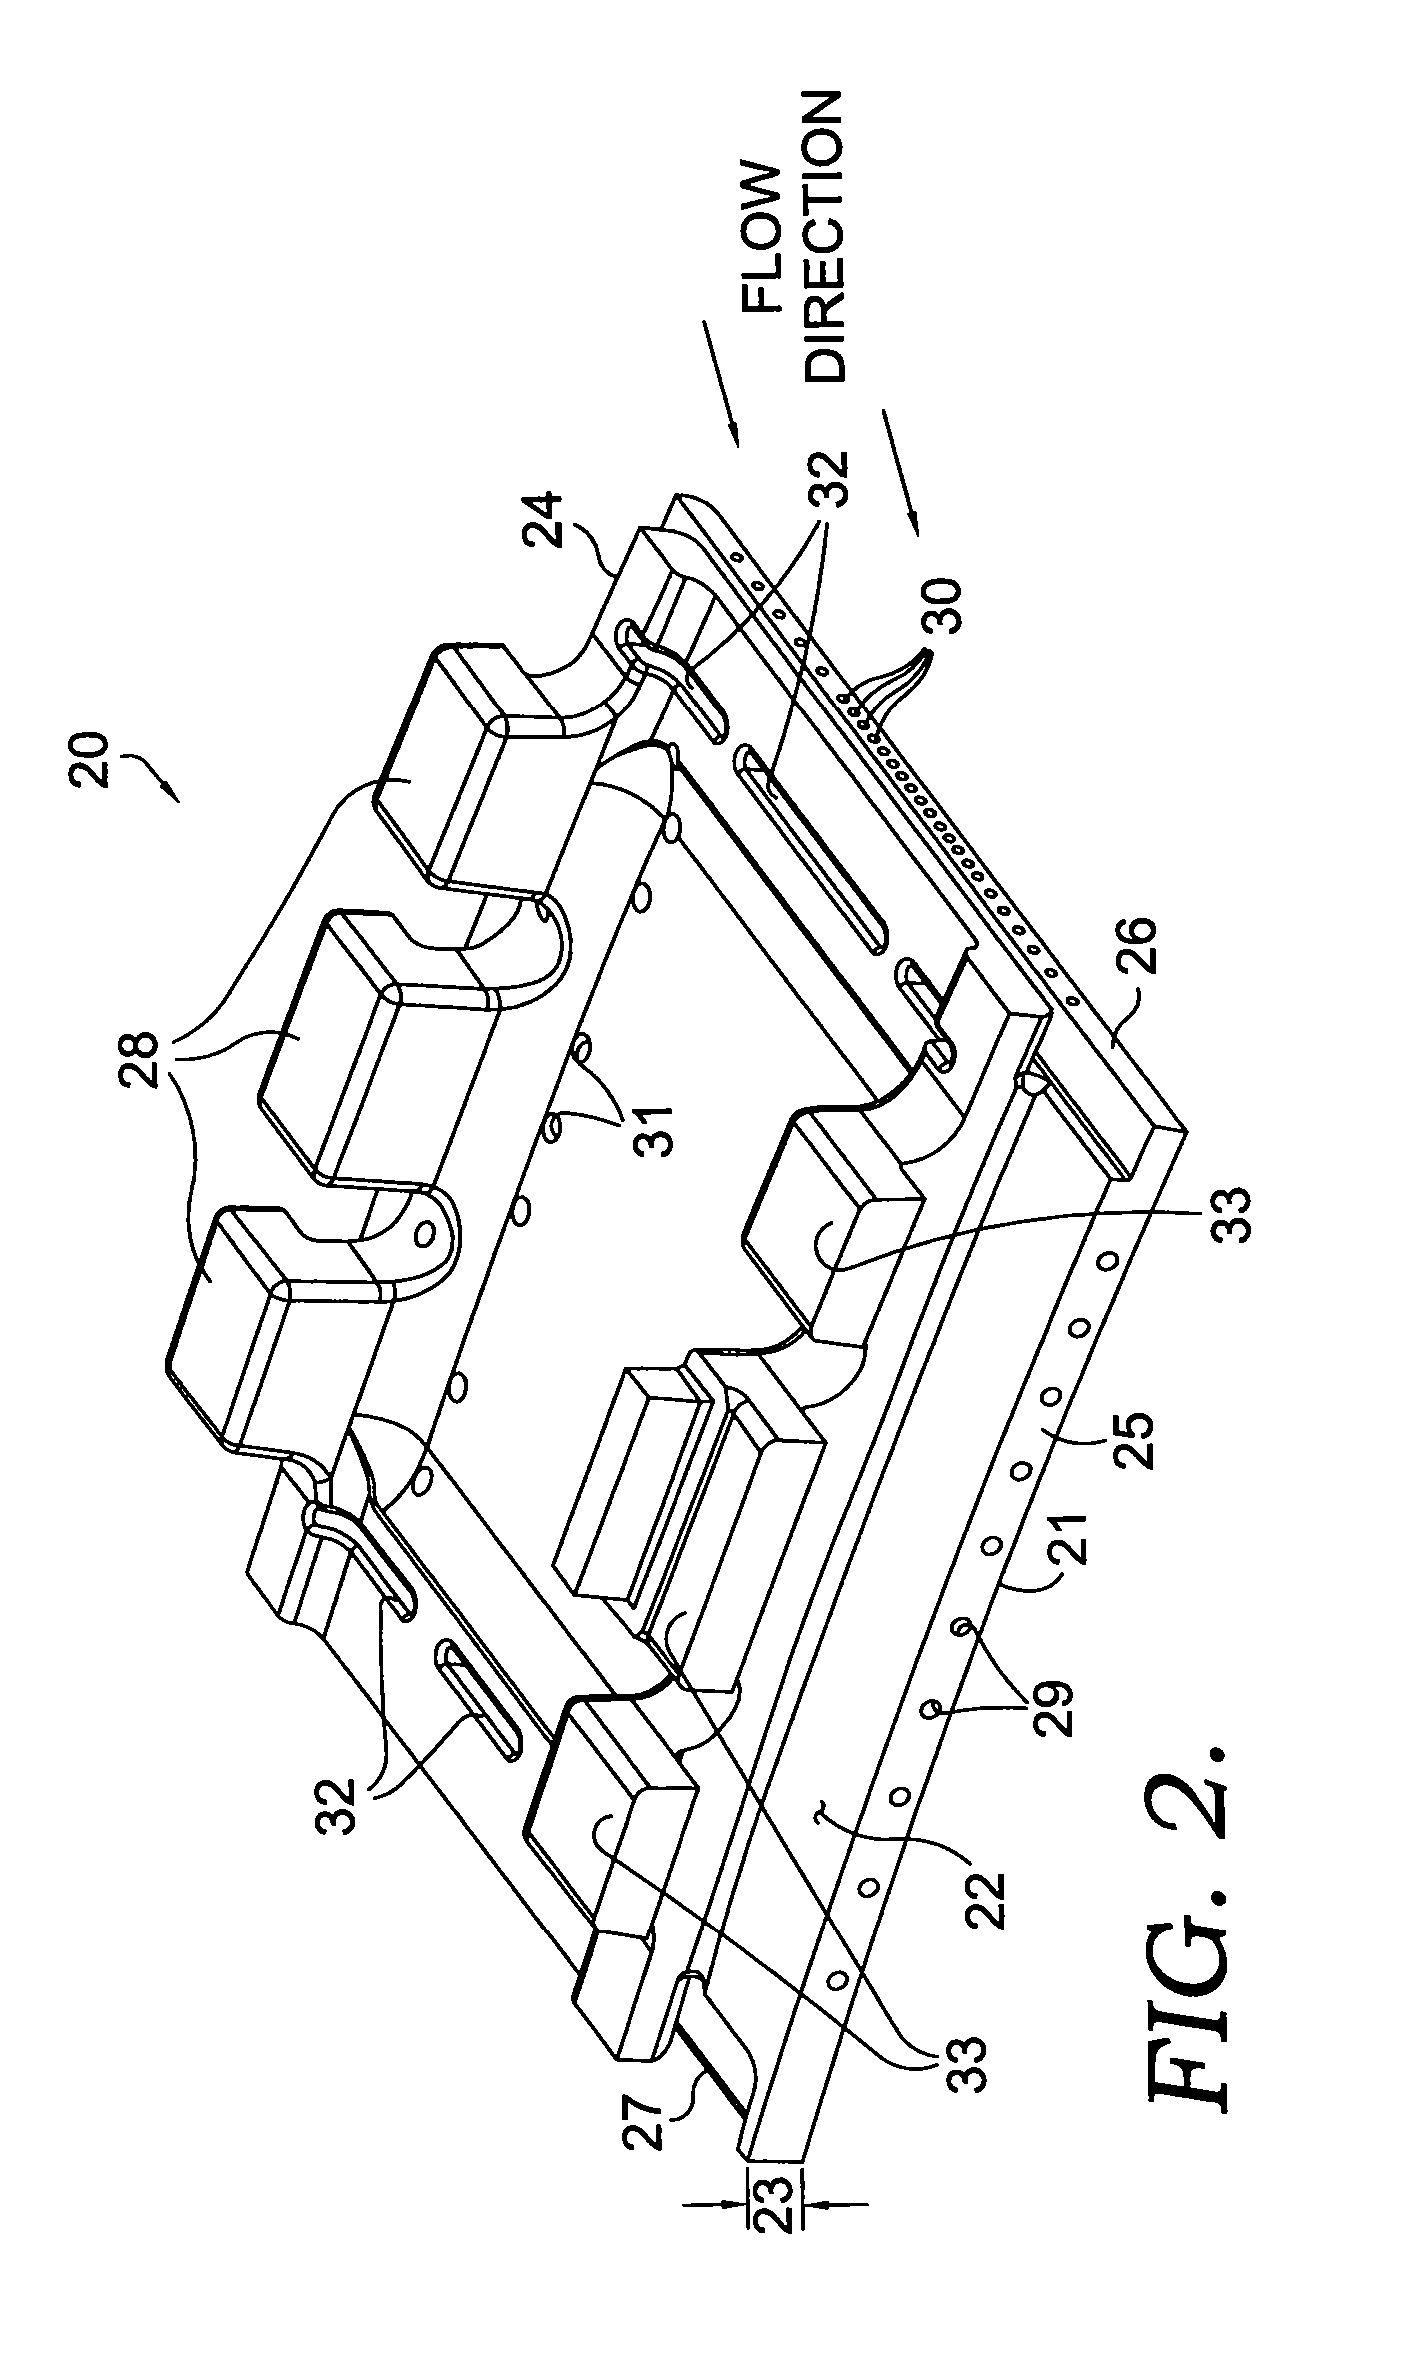 Shroud block with enhanced cooling